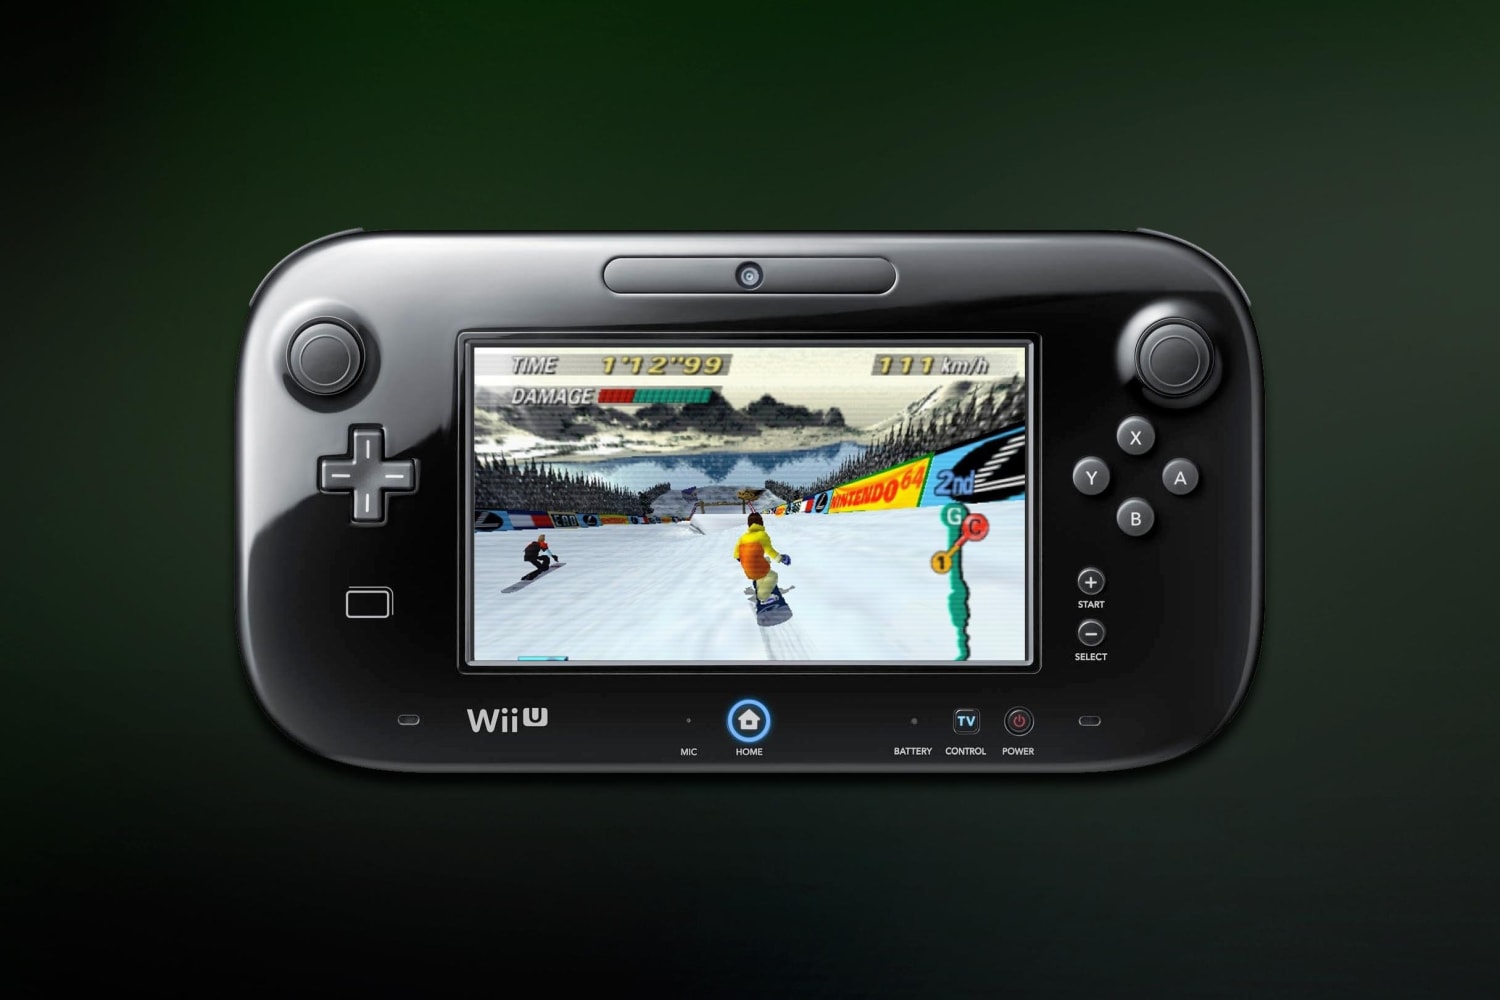 Liquefy Viewer Enumerate 9 amazing Nintendo action games we want on Wii U